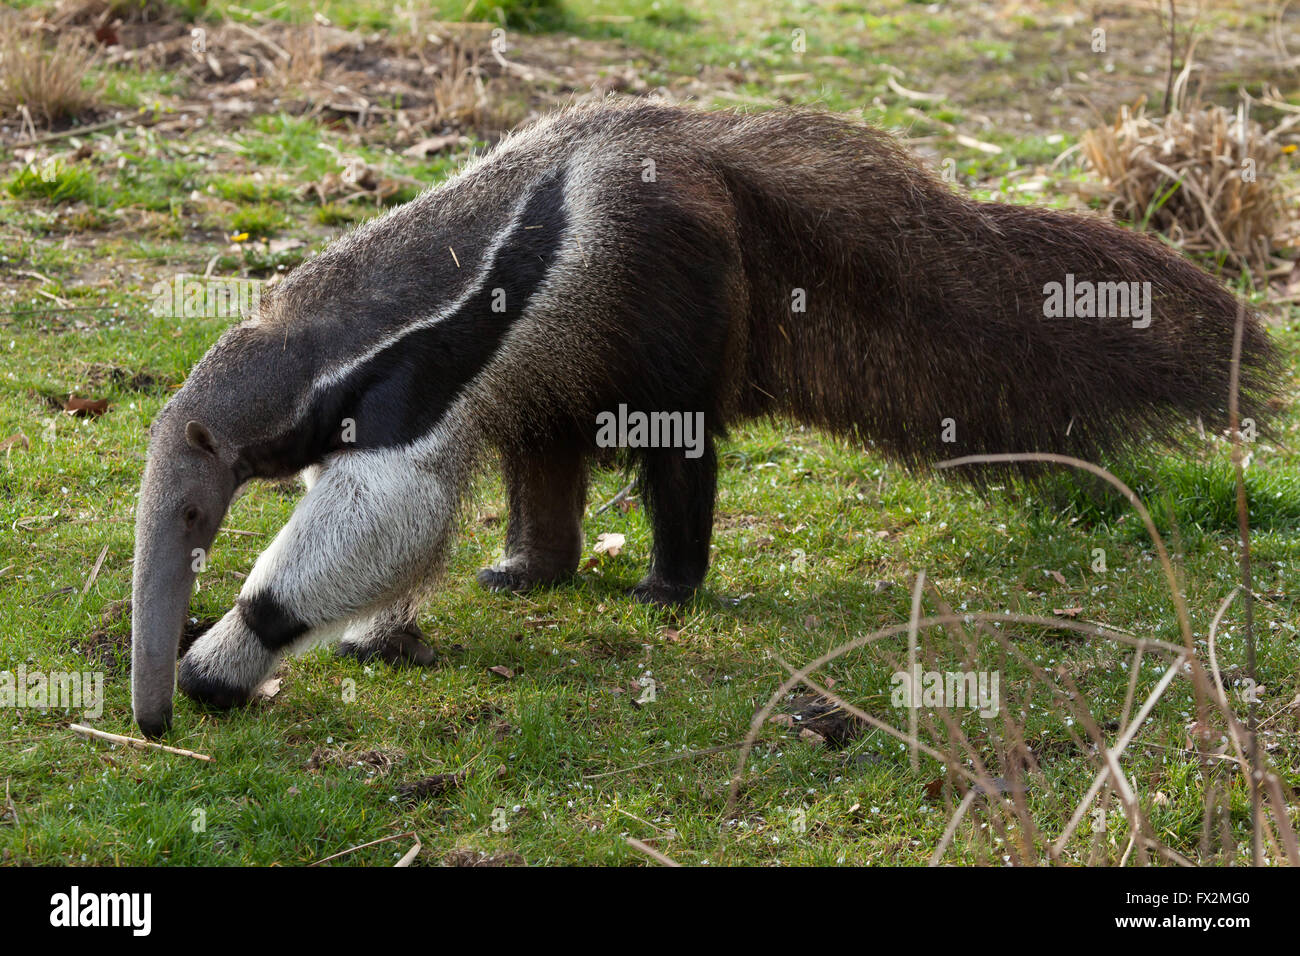 Giant anteater (Myrmecophaga tridactyla), also known as the ant bear at Budapest Zoo in Budapest, Hungary. Stock Photo